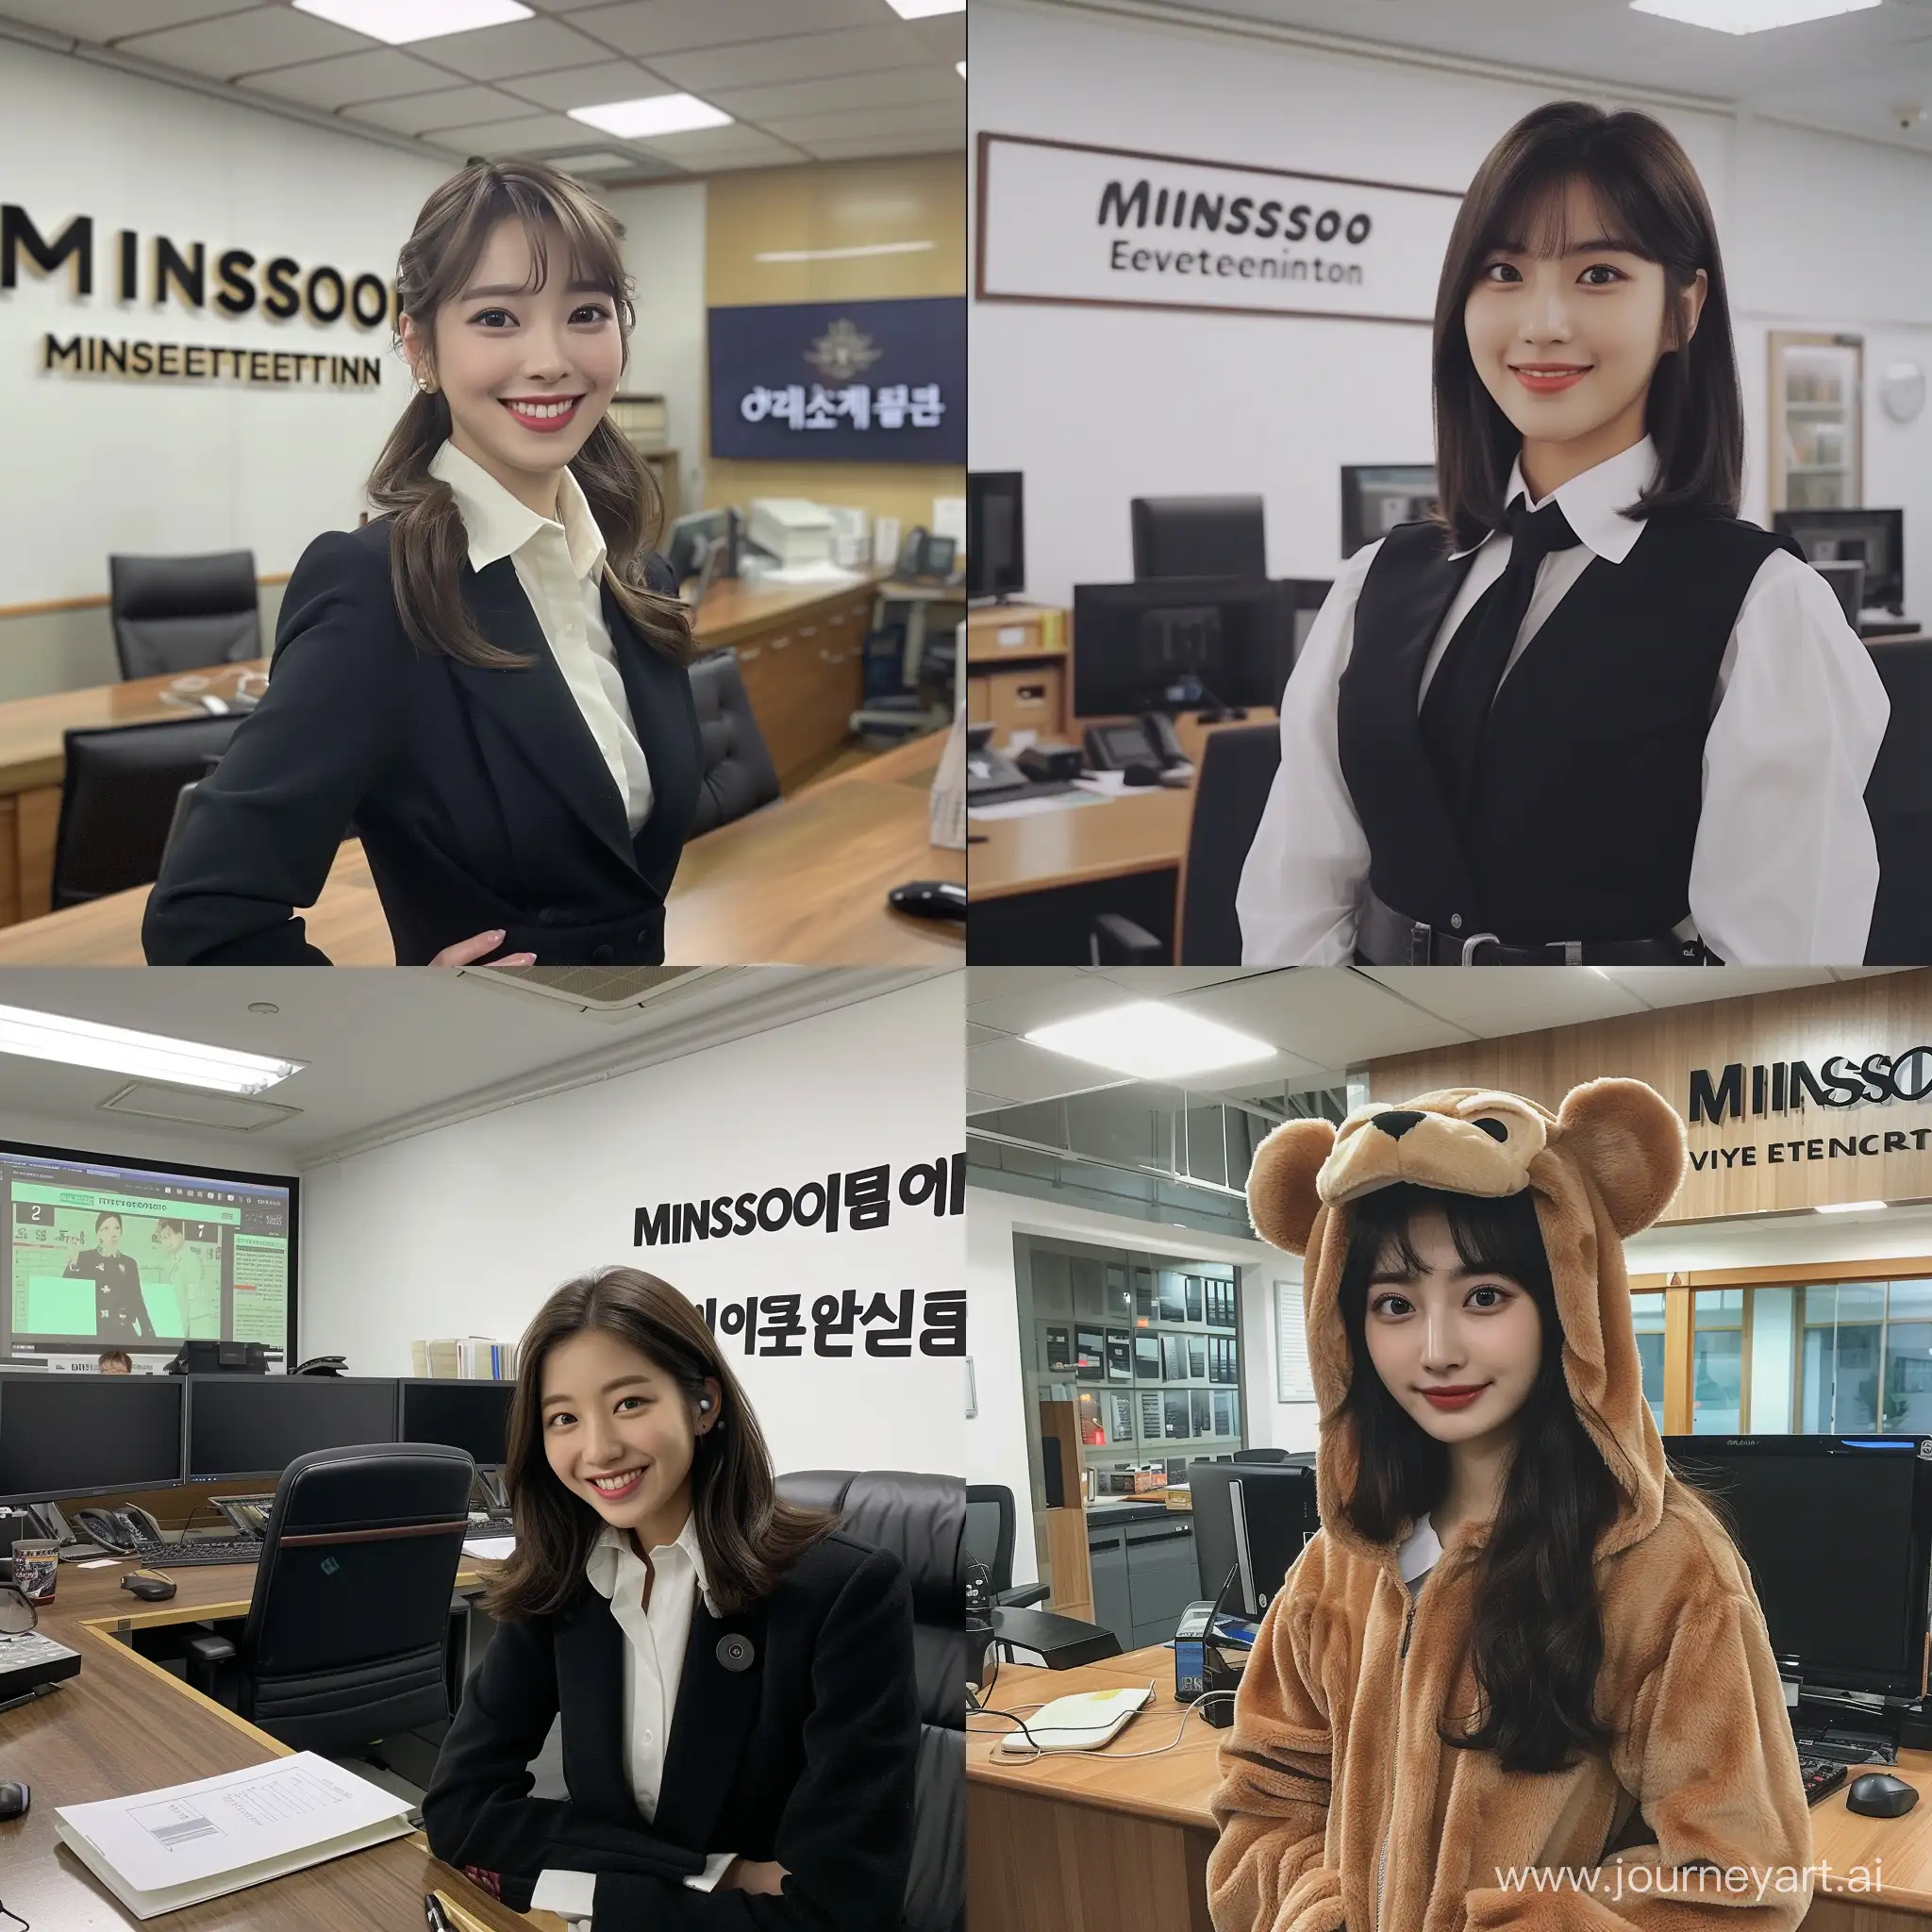 Korean girl in office costume in office with "Minsoo Entertainment" Written on wall